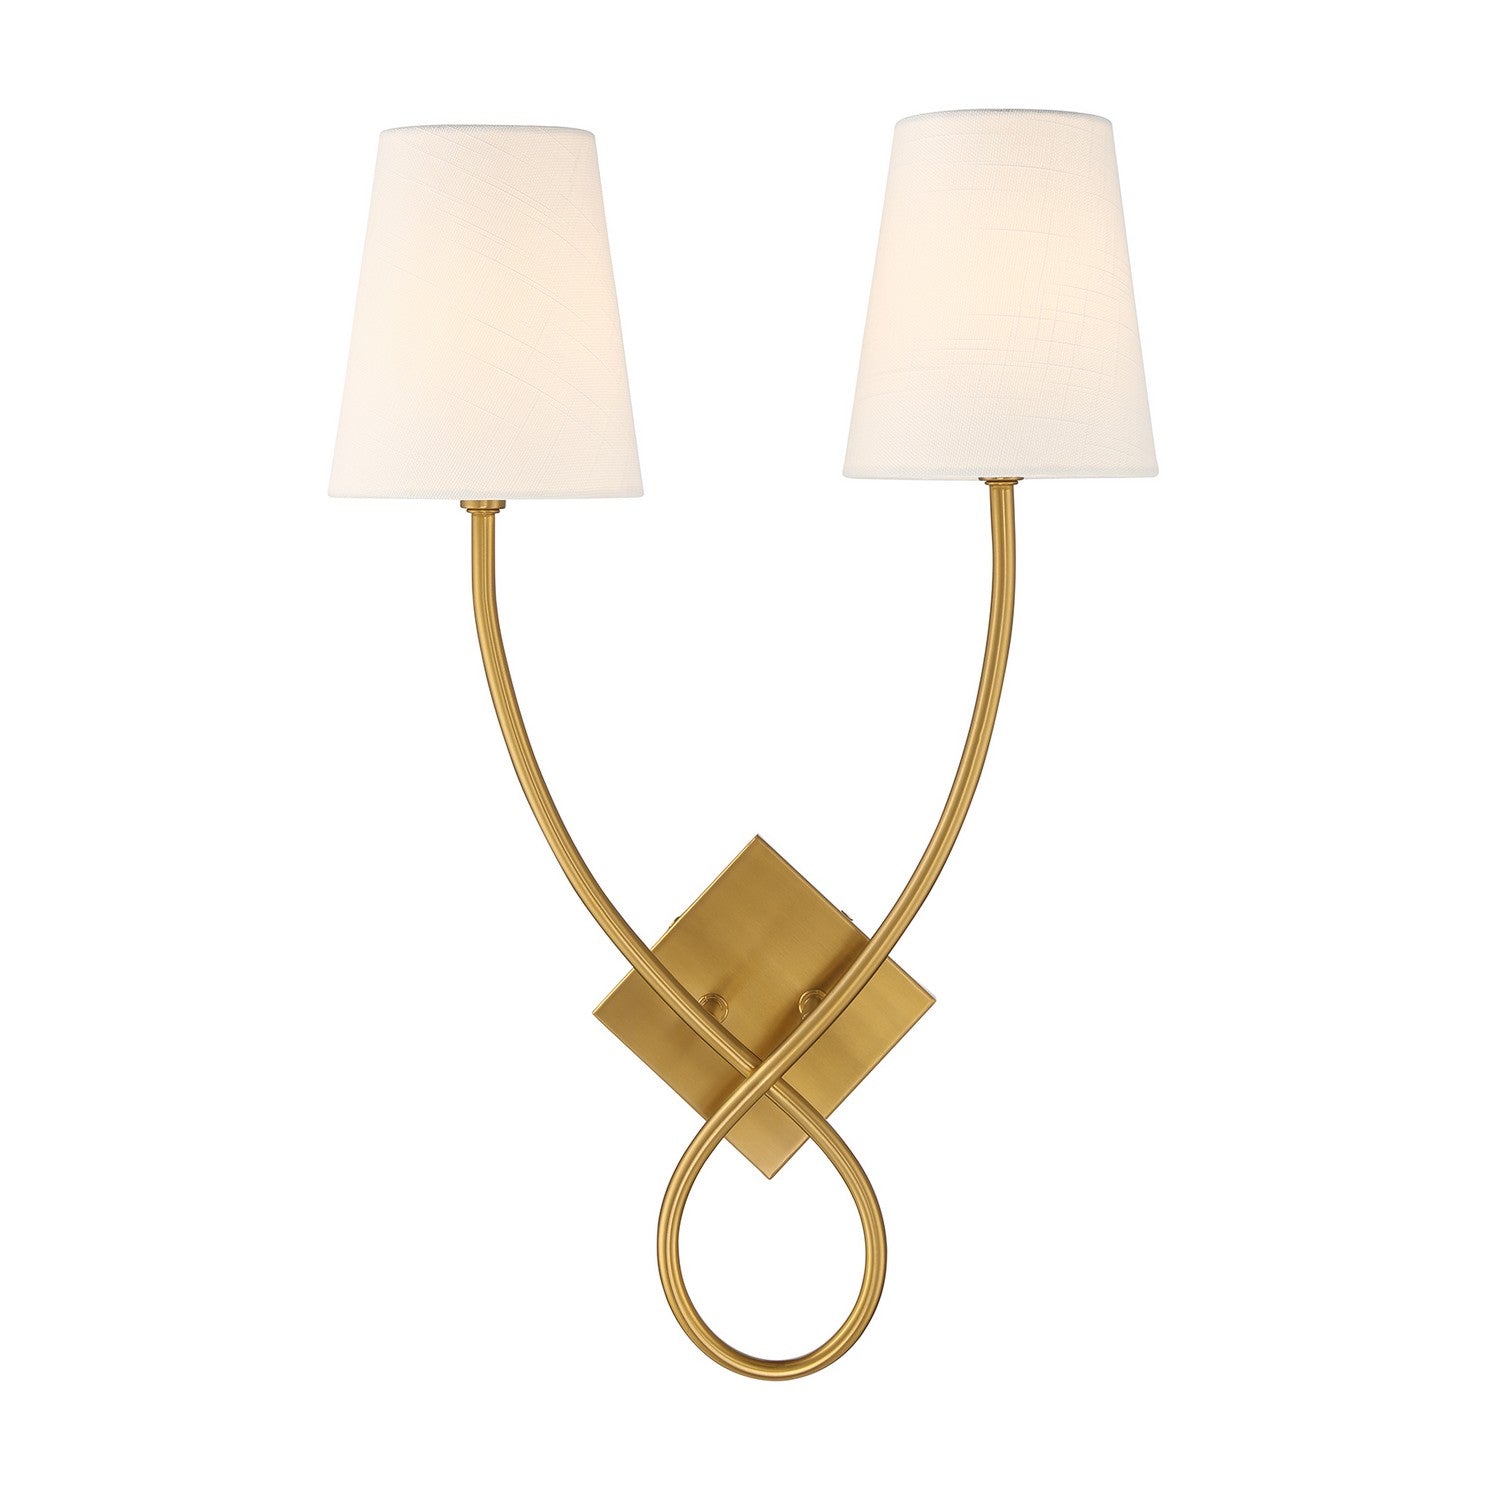 Savoy House - 9-4928-2-322 - Two Light Wall Sconce - Barclay - Warm Brass